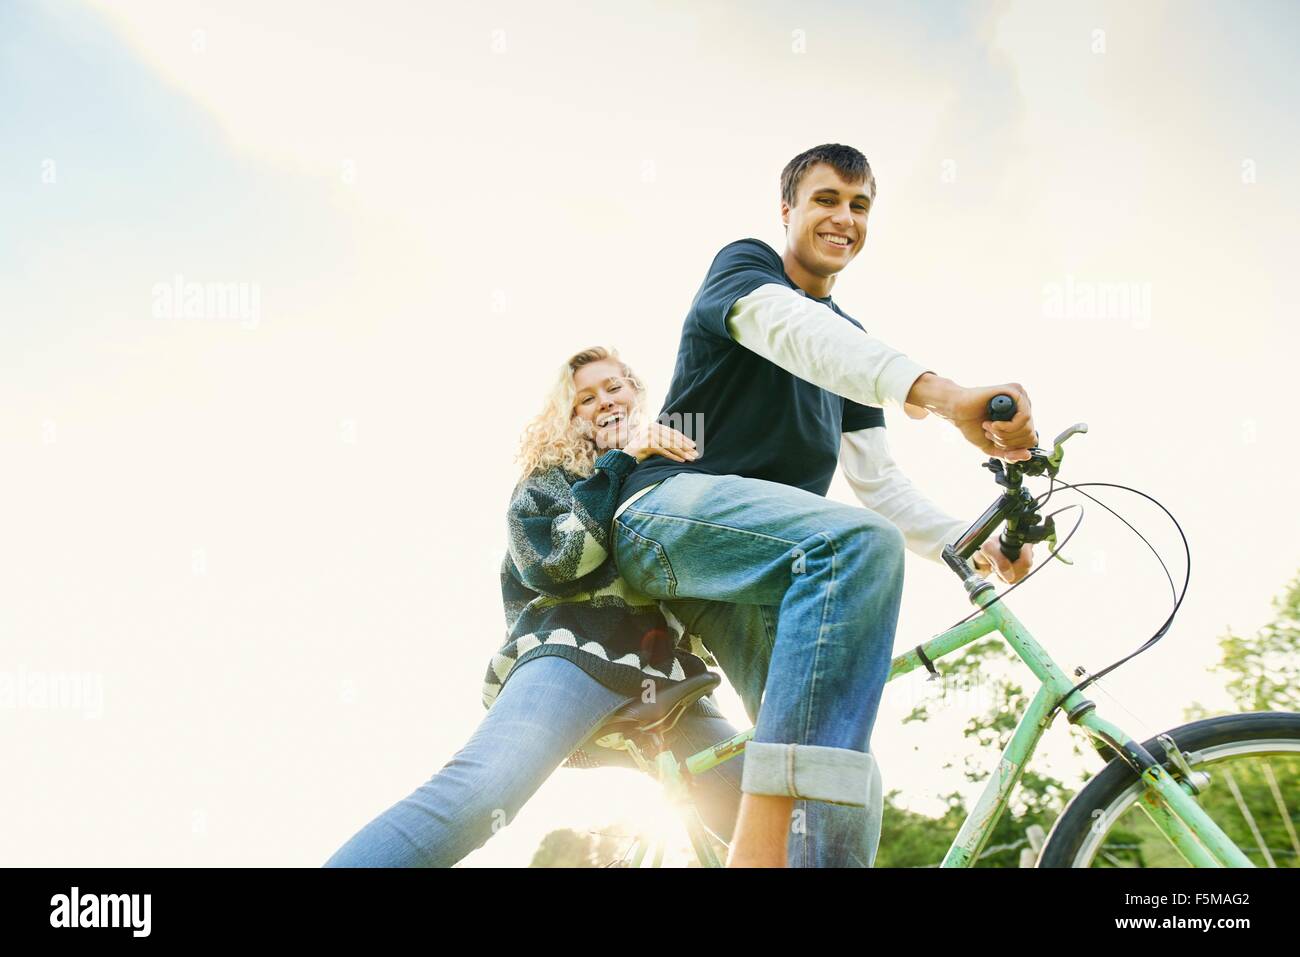 Low angle portrait of young couple on bicycle Stock Photo